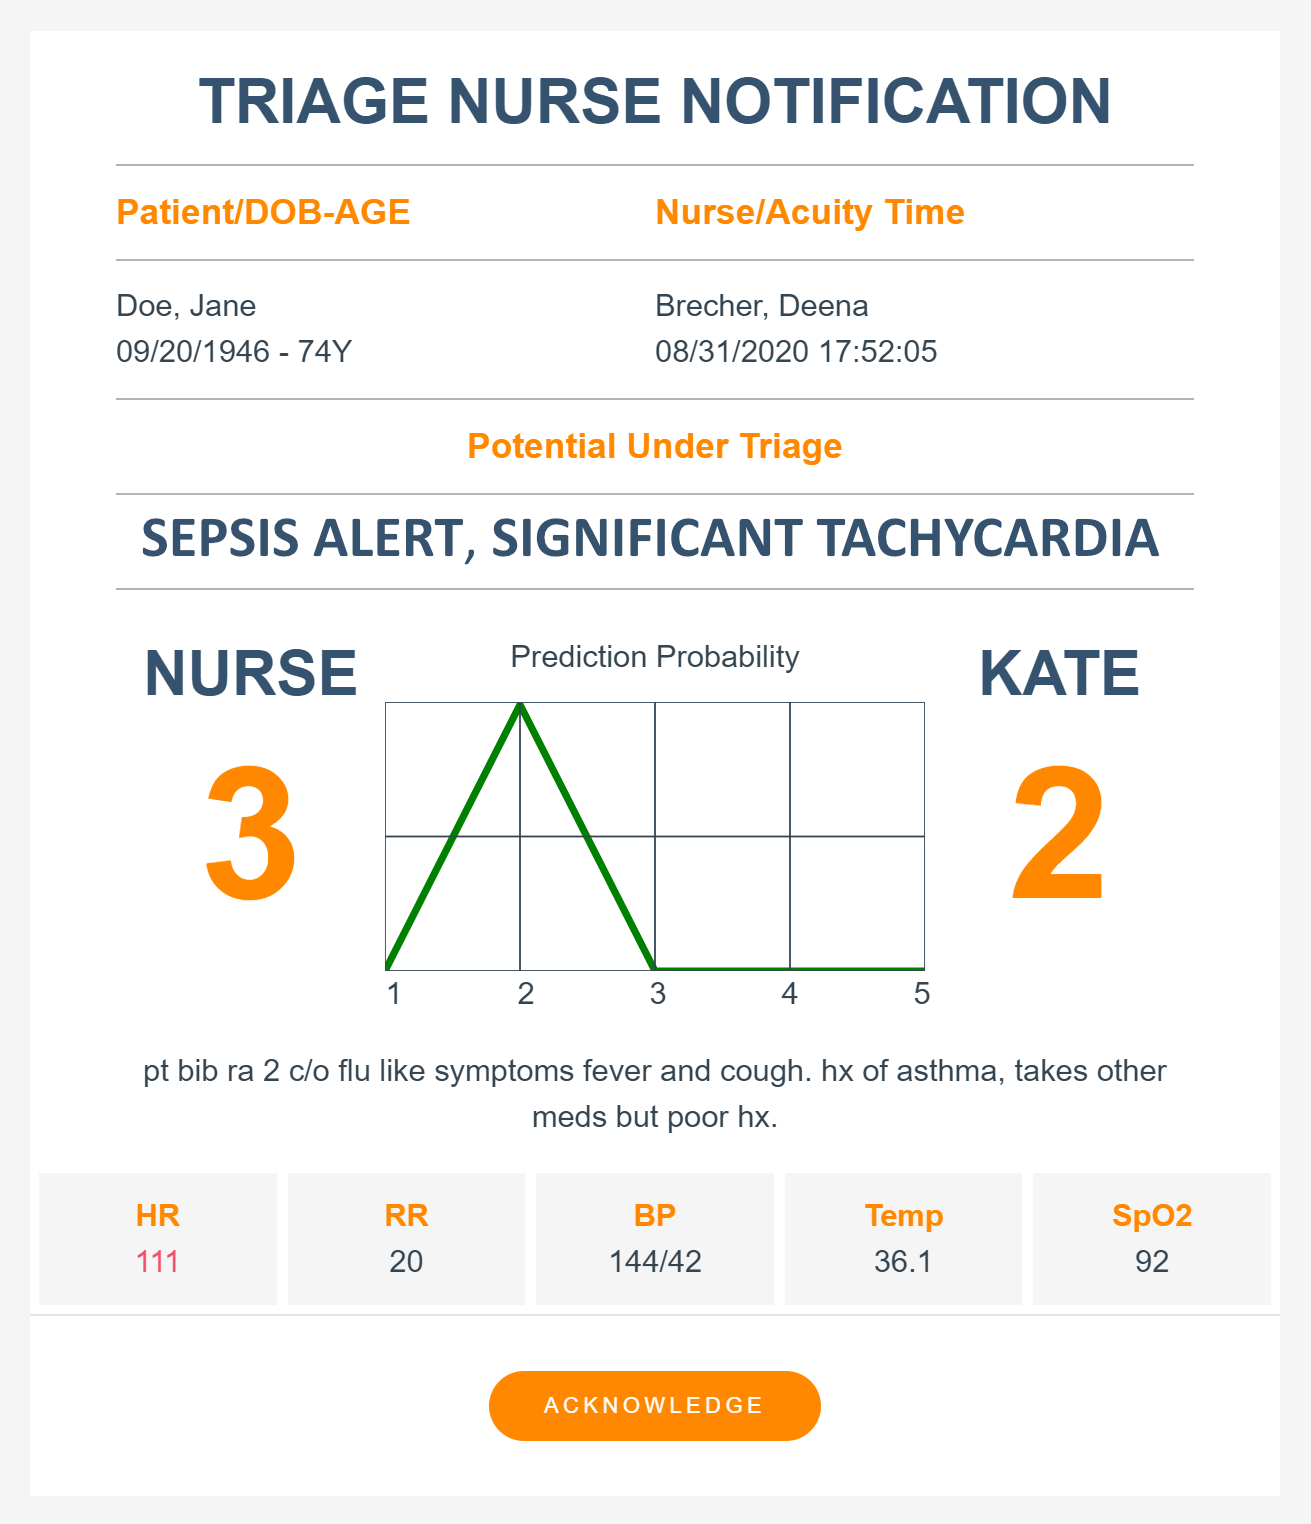 KATE sepsis alert with significant tachy